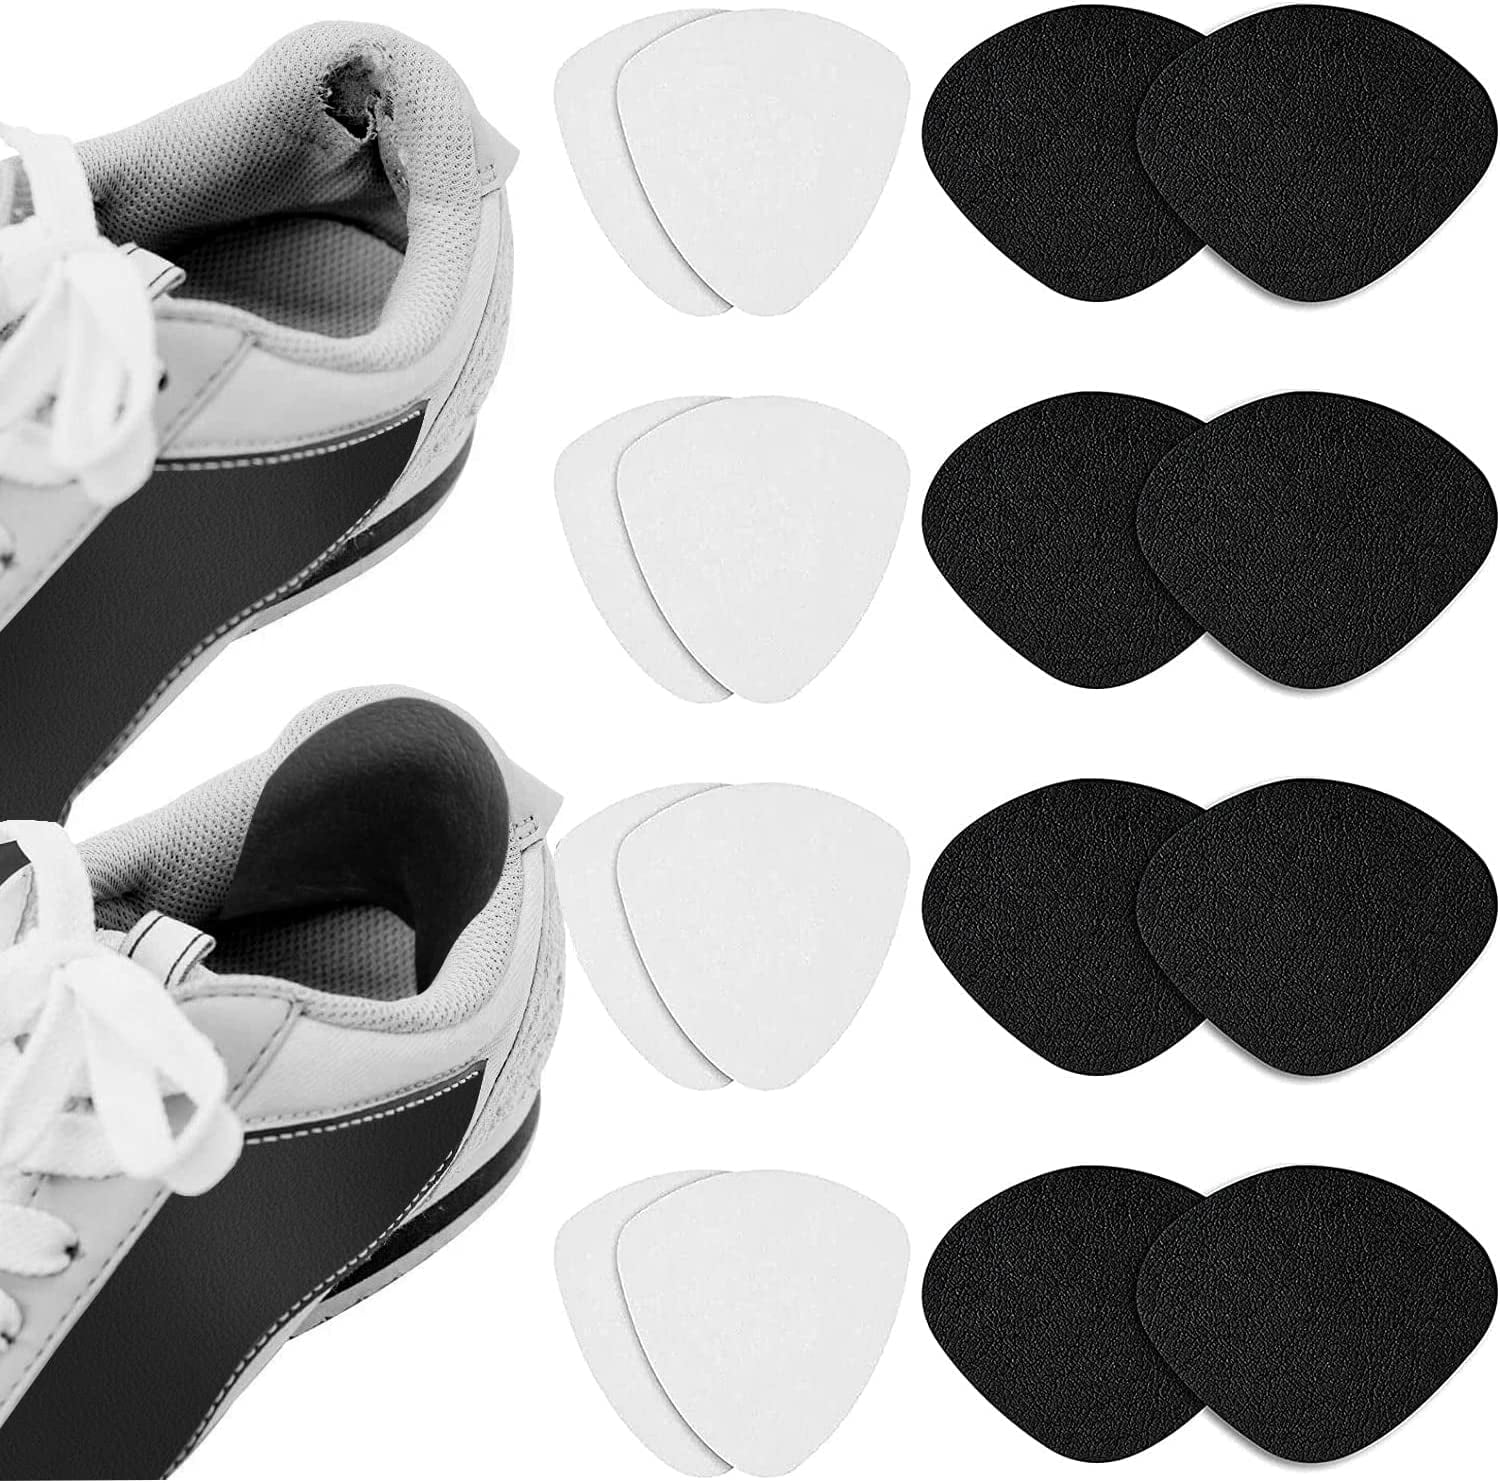 Shoe Hole Repair Patch, One House 8 Pairs Self-Adhesive Shoe Heel Repair,  Hole in Shoe Repair Kit for Sneaker, Leather Shoes, High Heels (Black &  White) 